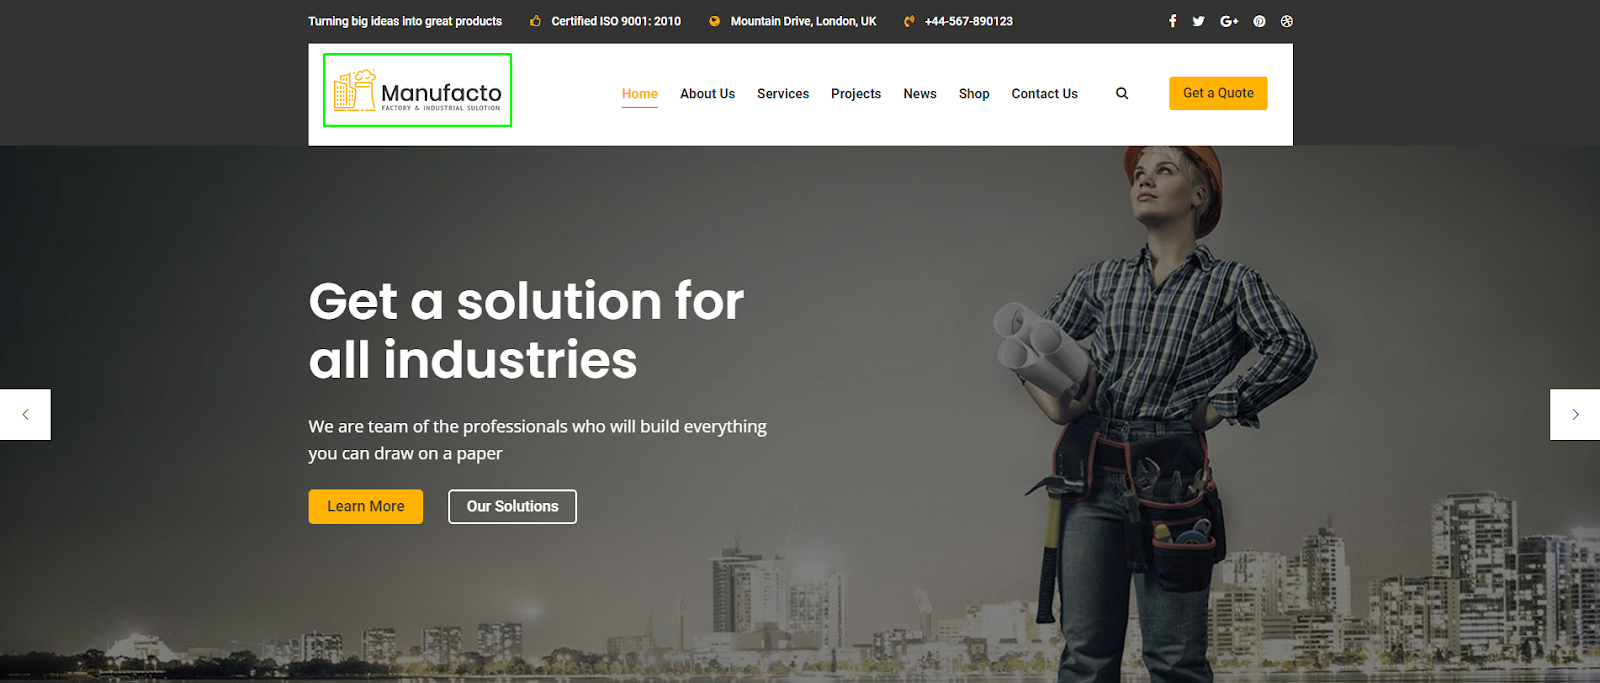 Manufacto - Industry and Factory WordPress Theme